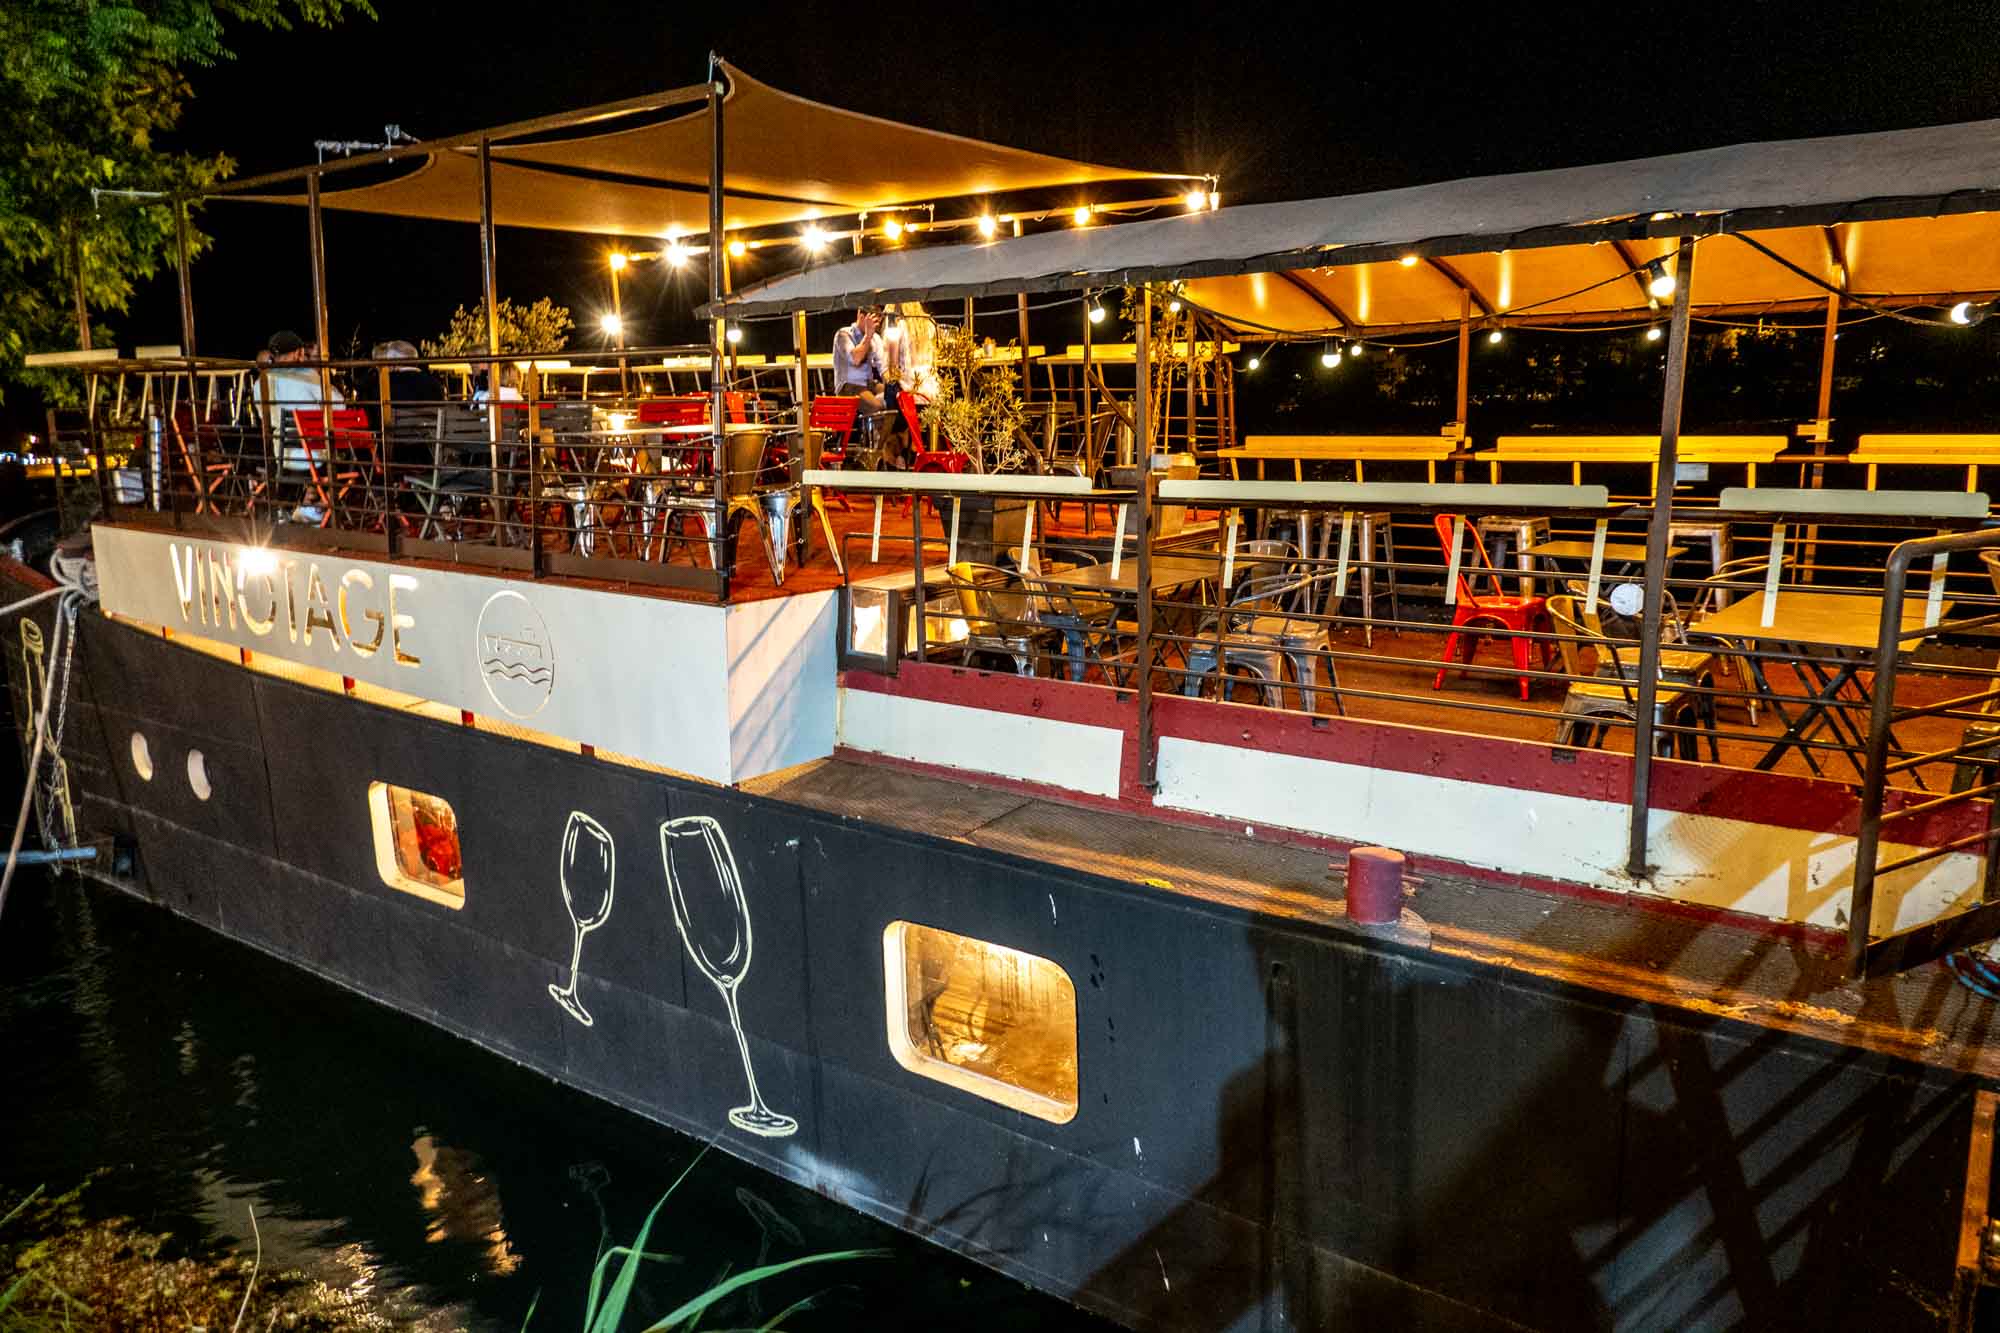 Wine bar on a black barge lit up at night with a sign for 